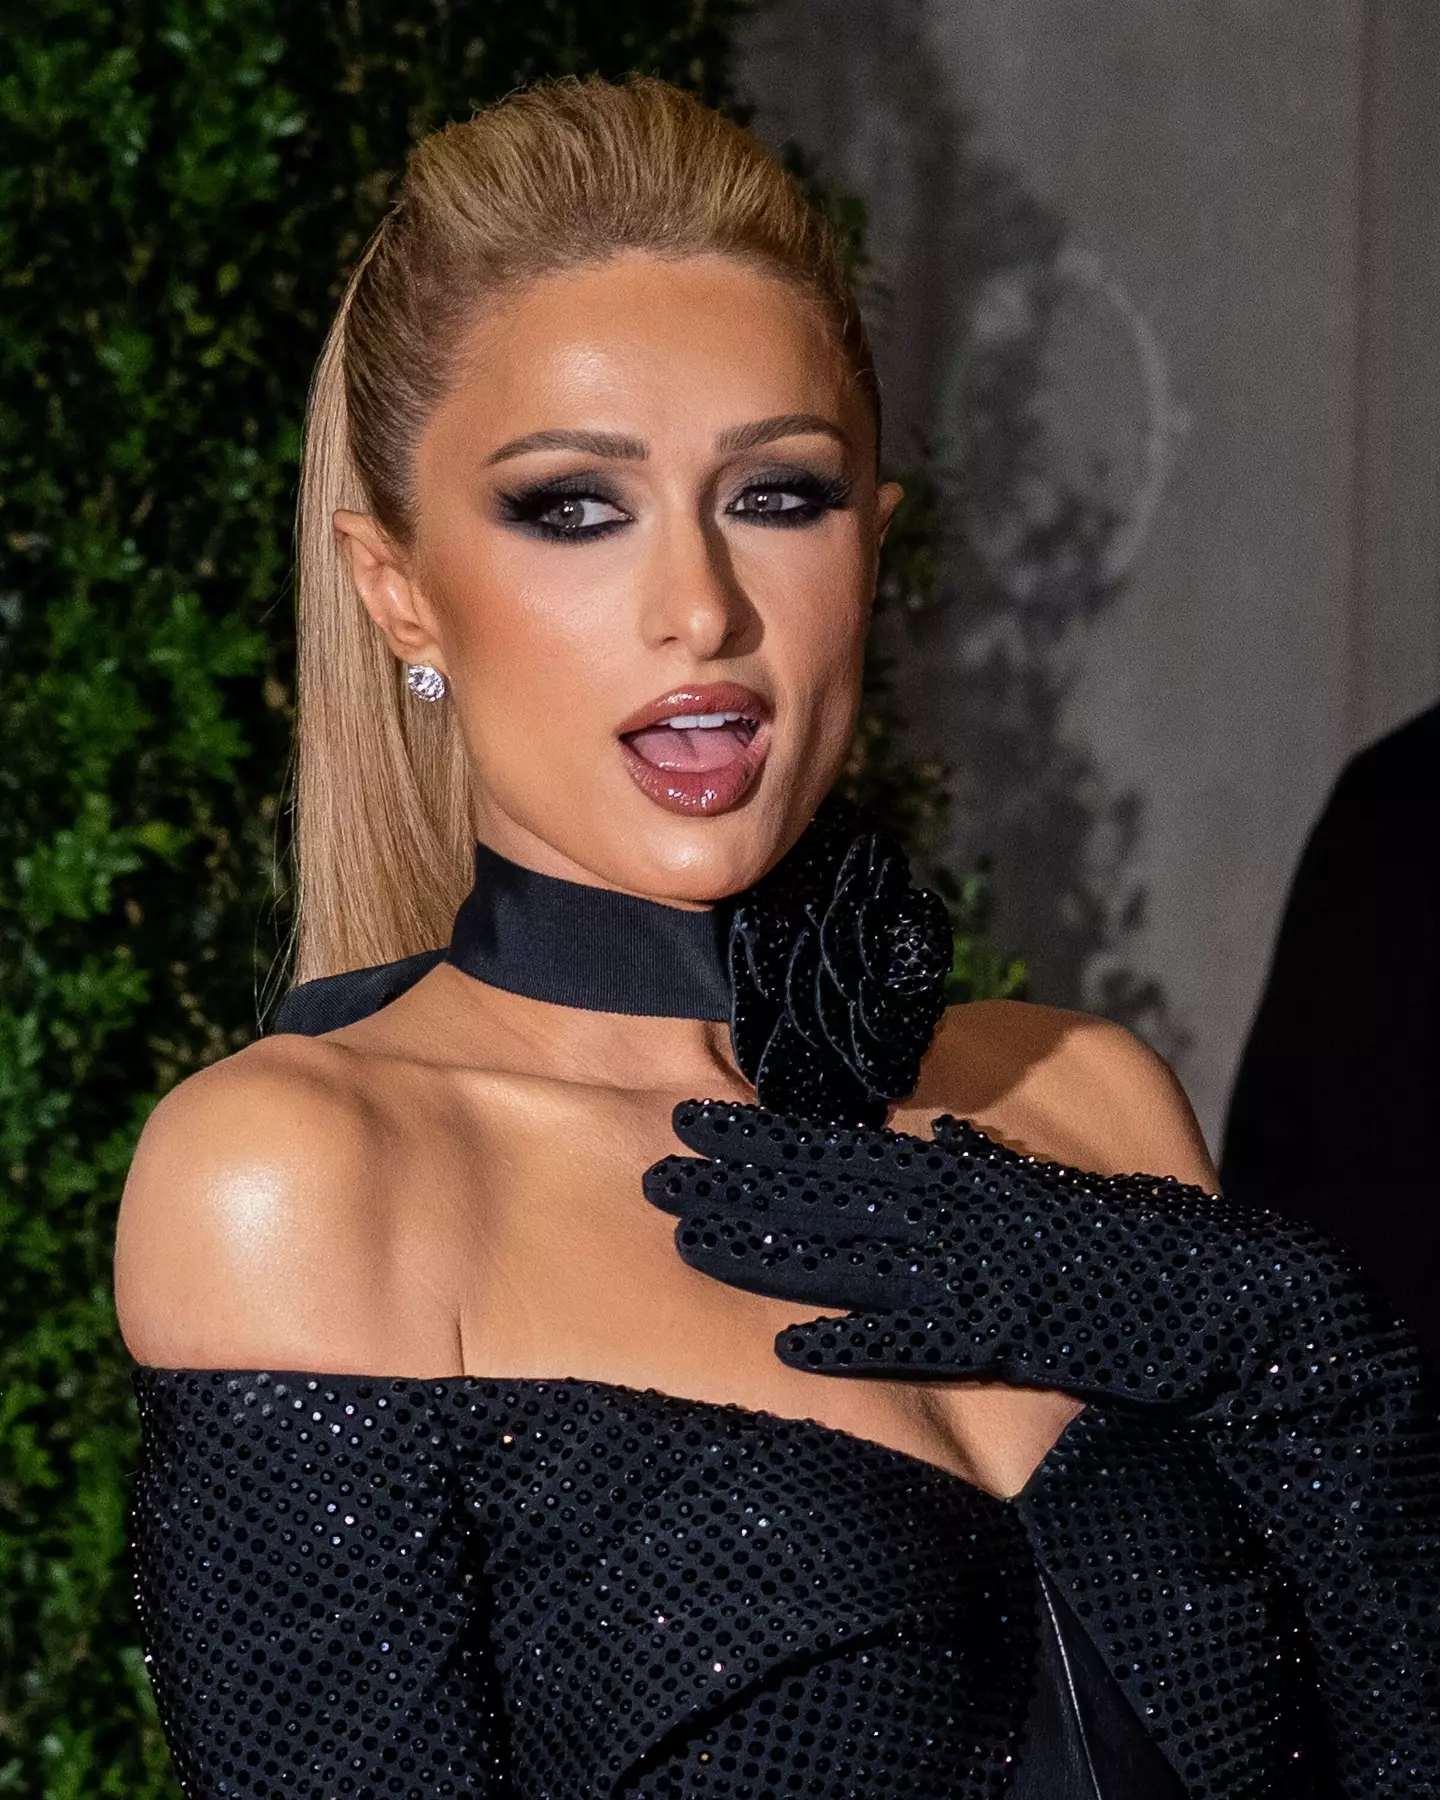 Fans were shocked by the colour of Paris Hilton's eyes at the Met Gala.